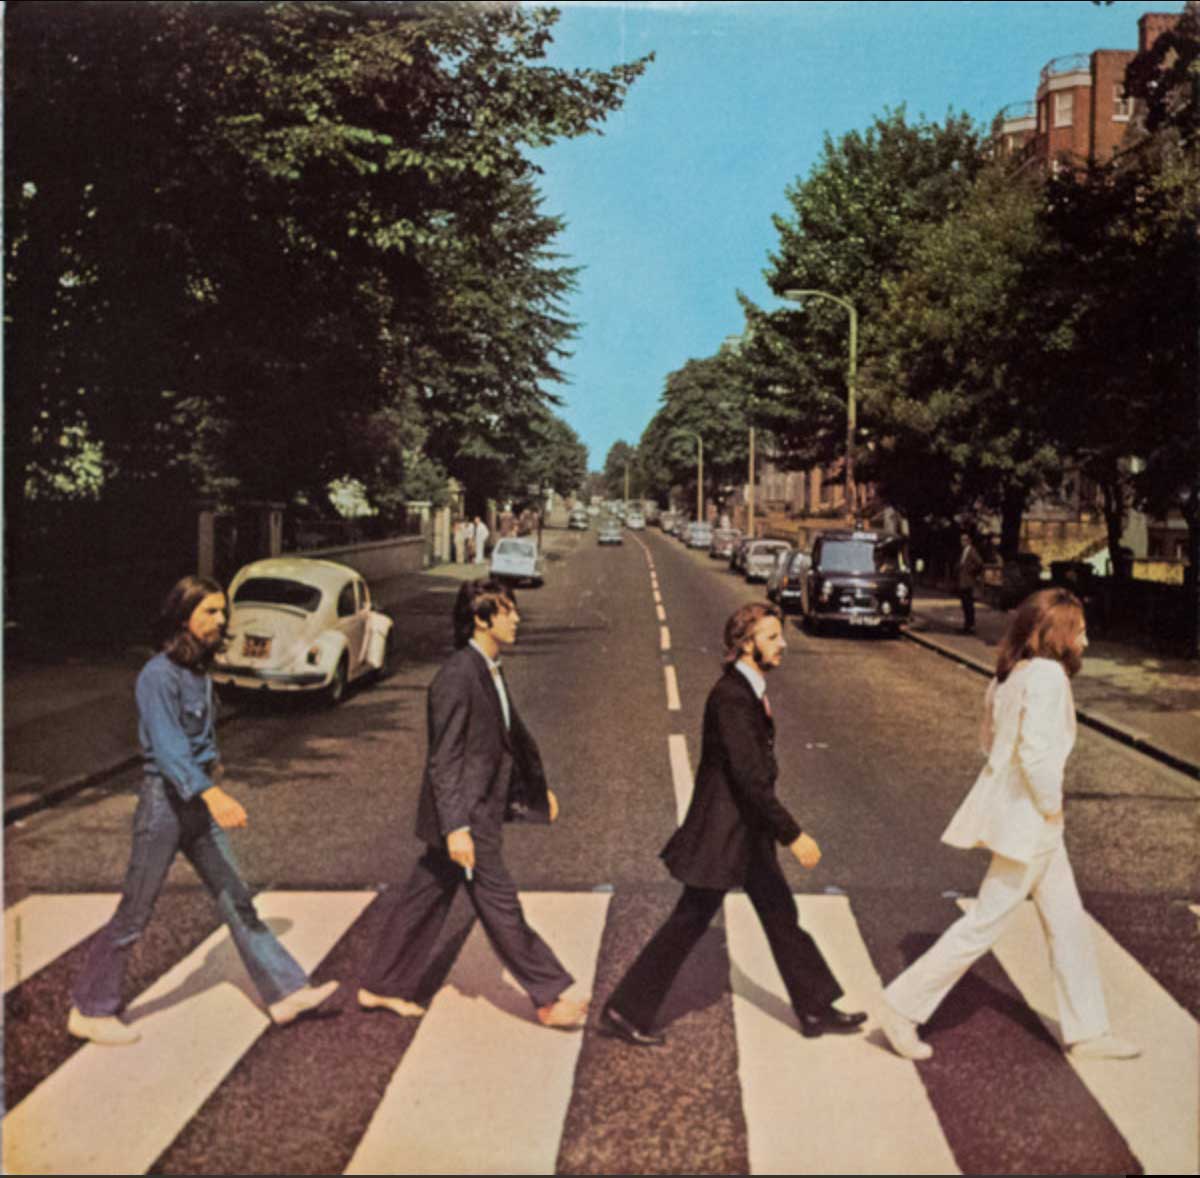 The Beatles ‎– Abbey Road - Apple Label